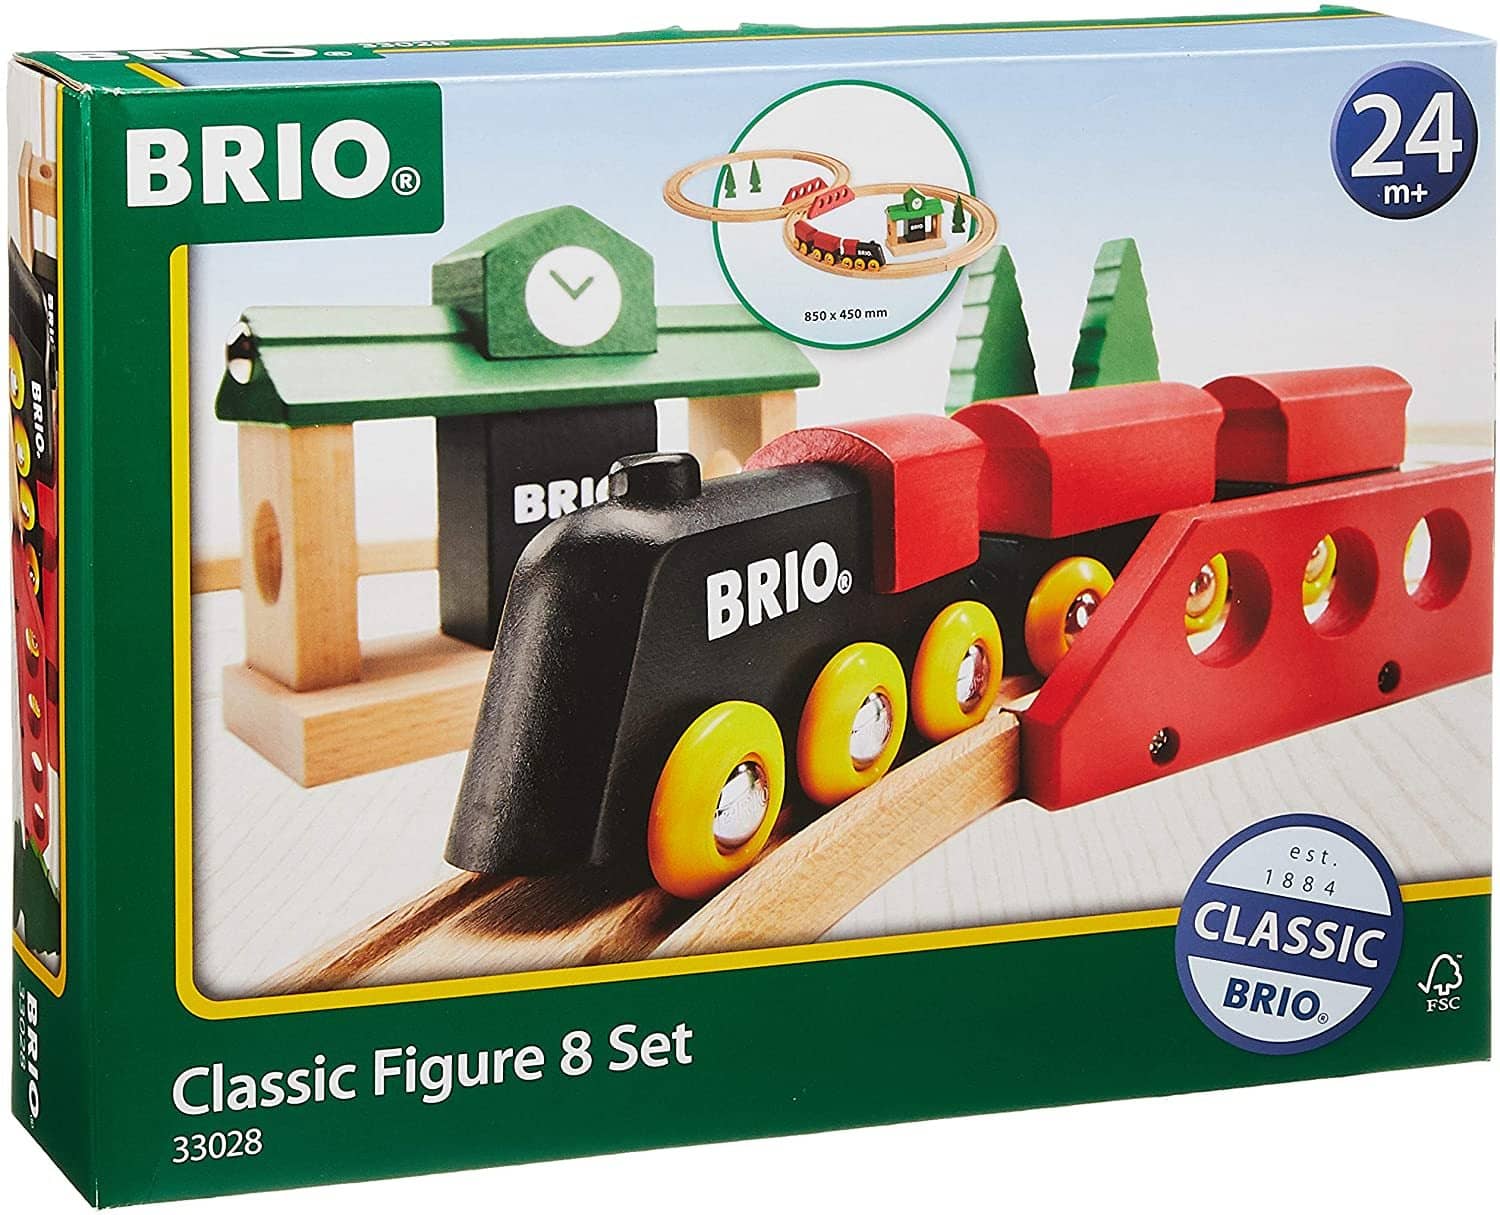 Brio World - 33028 Classic Figure 8 Set | 22 Piece Toy Train Set With Accessories And Wooden Tracks For Kids Age 2 And Up-Kidding Around NYC